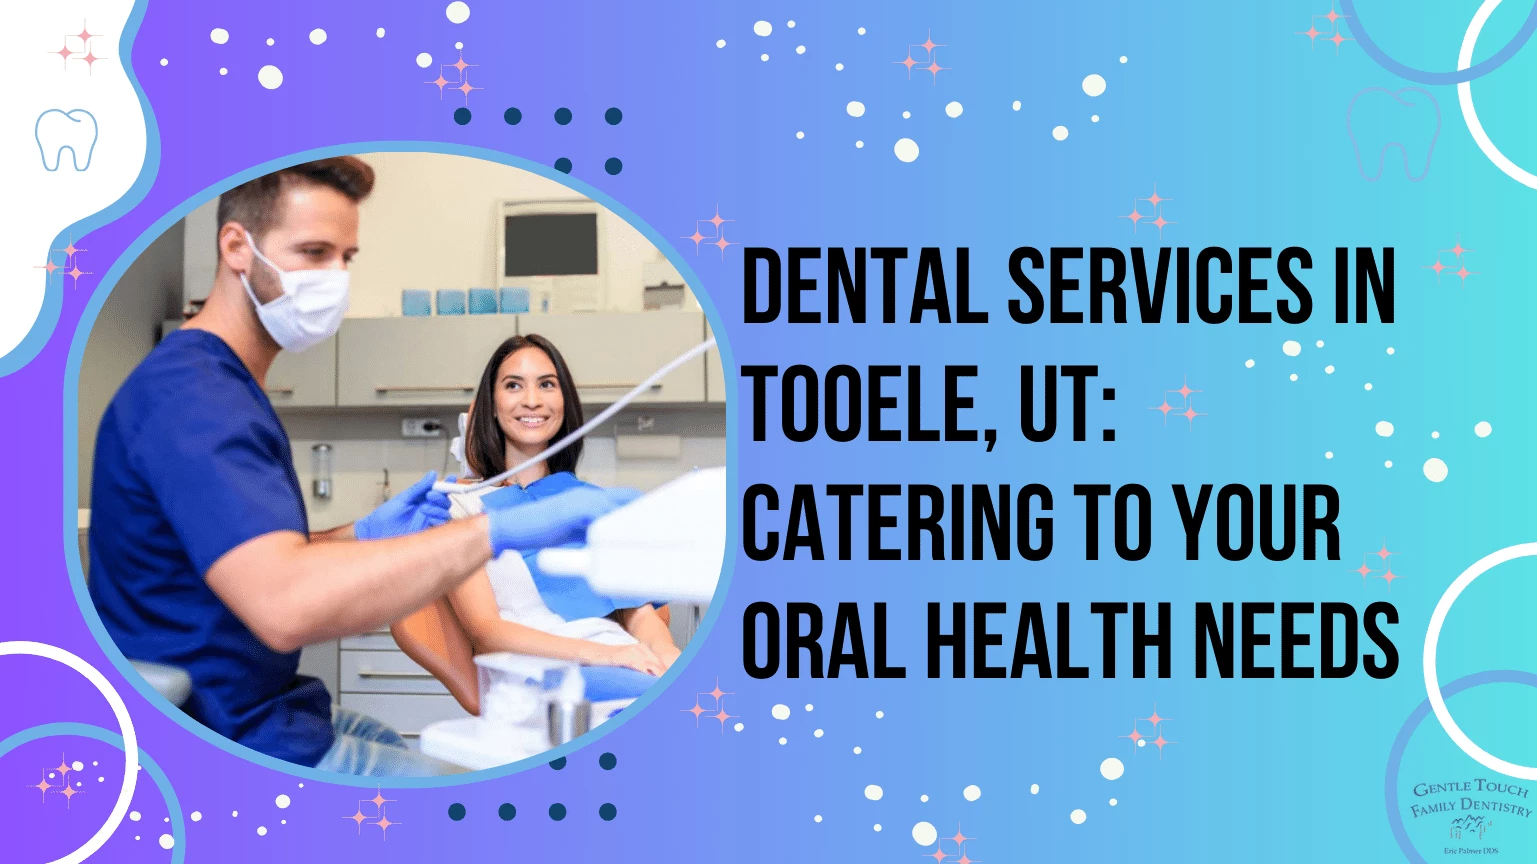 Dental Services in Tooele, UT Catering to Your Oral Health Needs